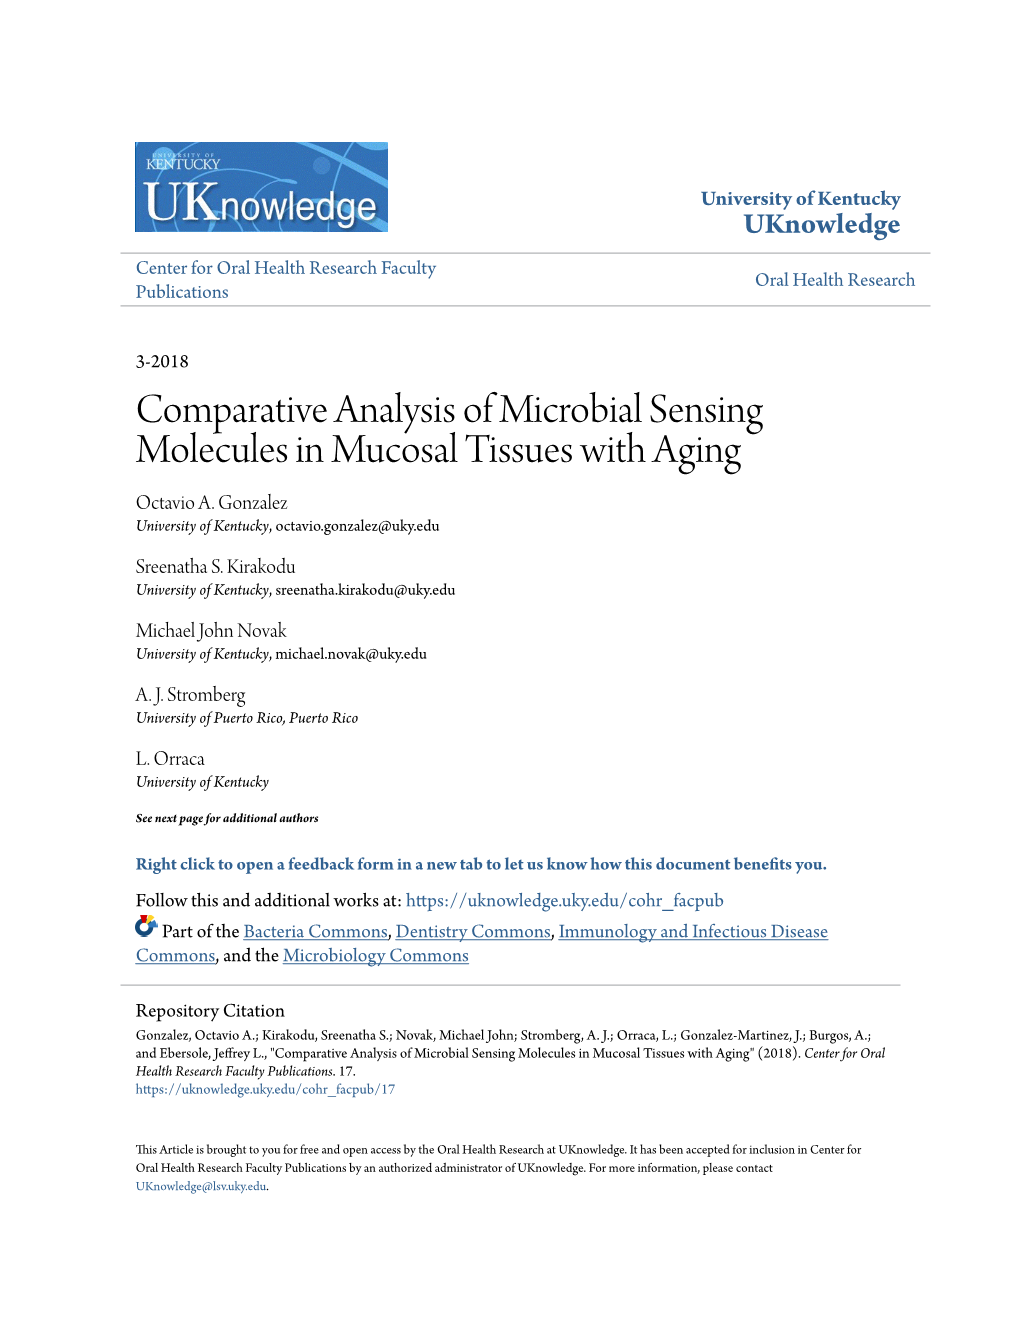 Comparative Analysis of Microbial Sensing Molecules in Mucosal Tissues with Aging Octavio A